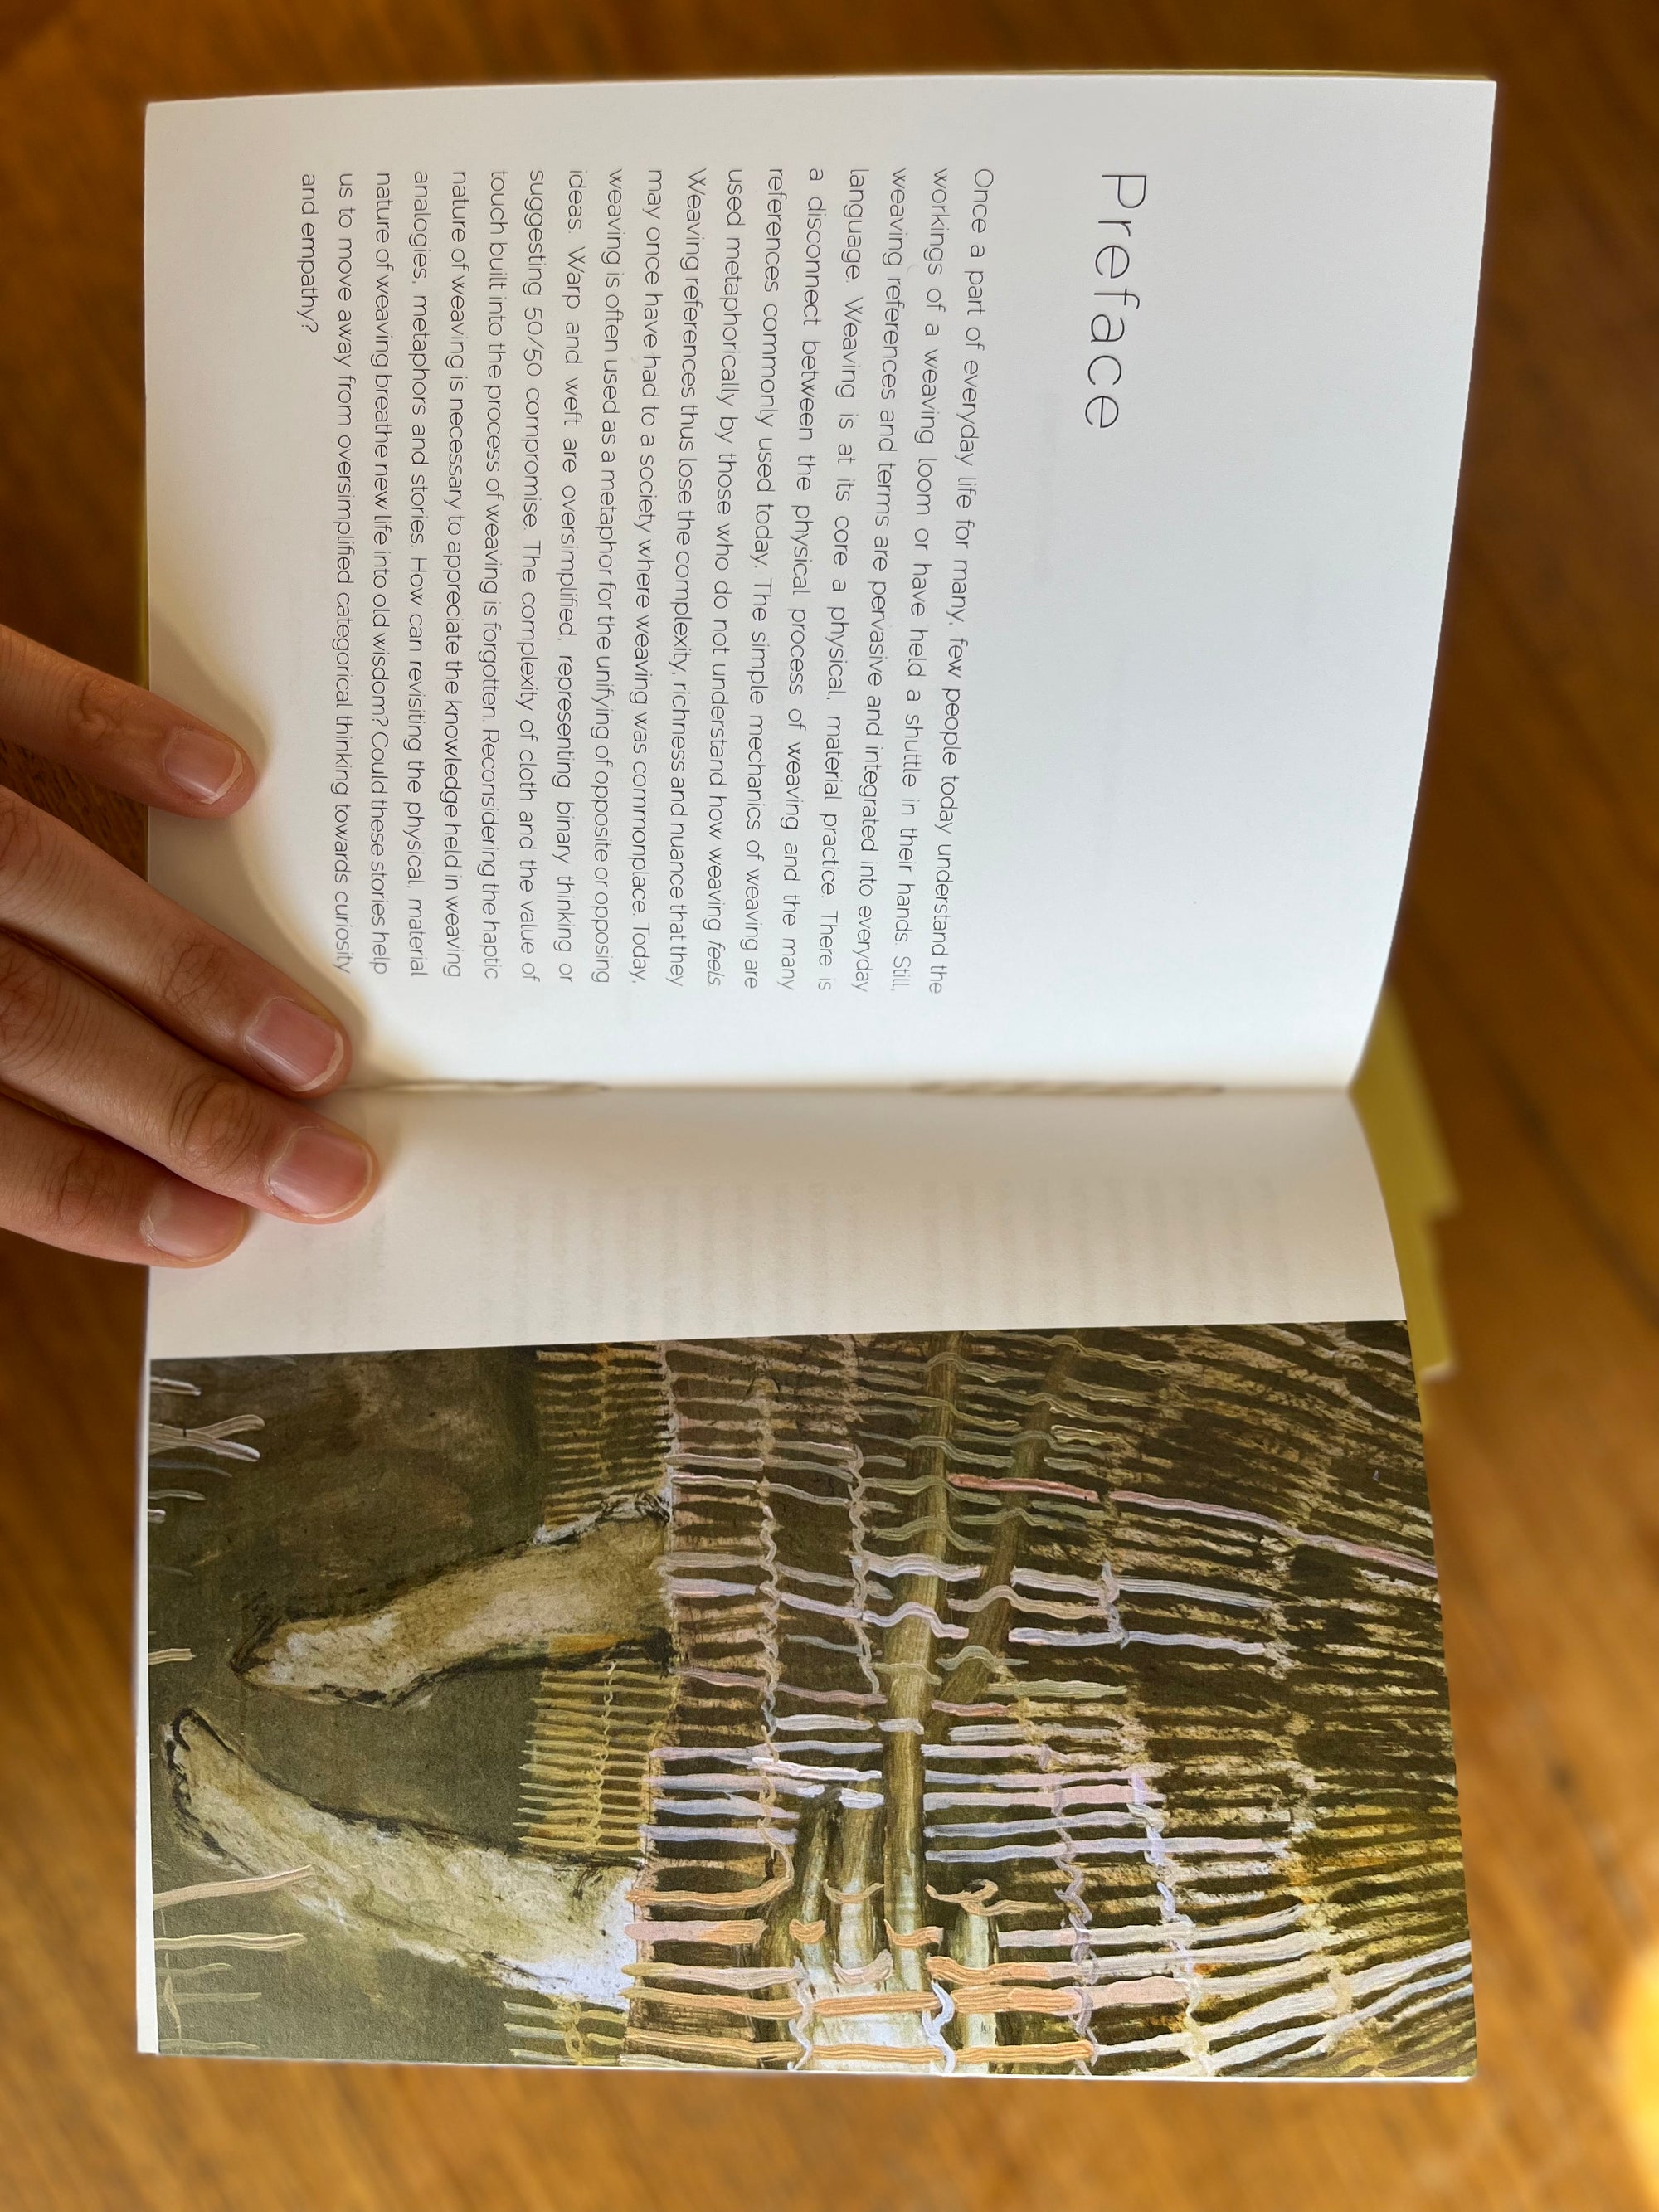 Hand Woven: A search for new knowledge in old weaving stories. By Kim McCollum